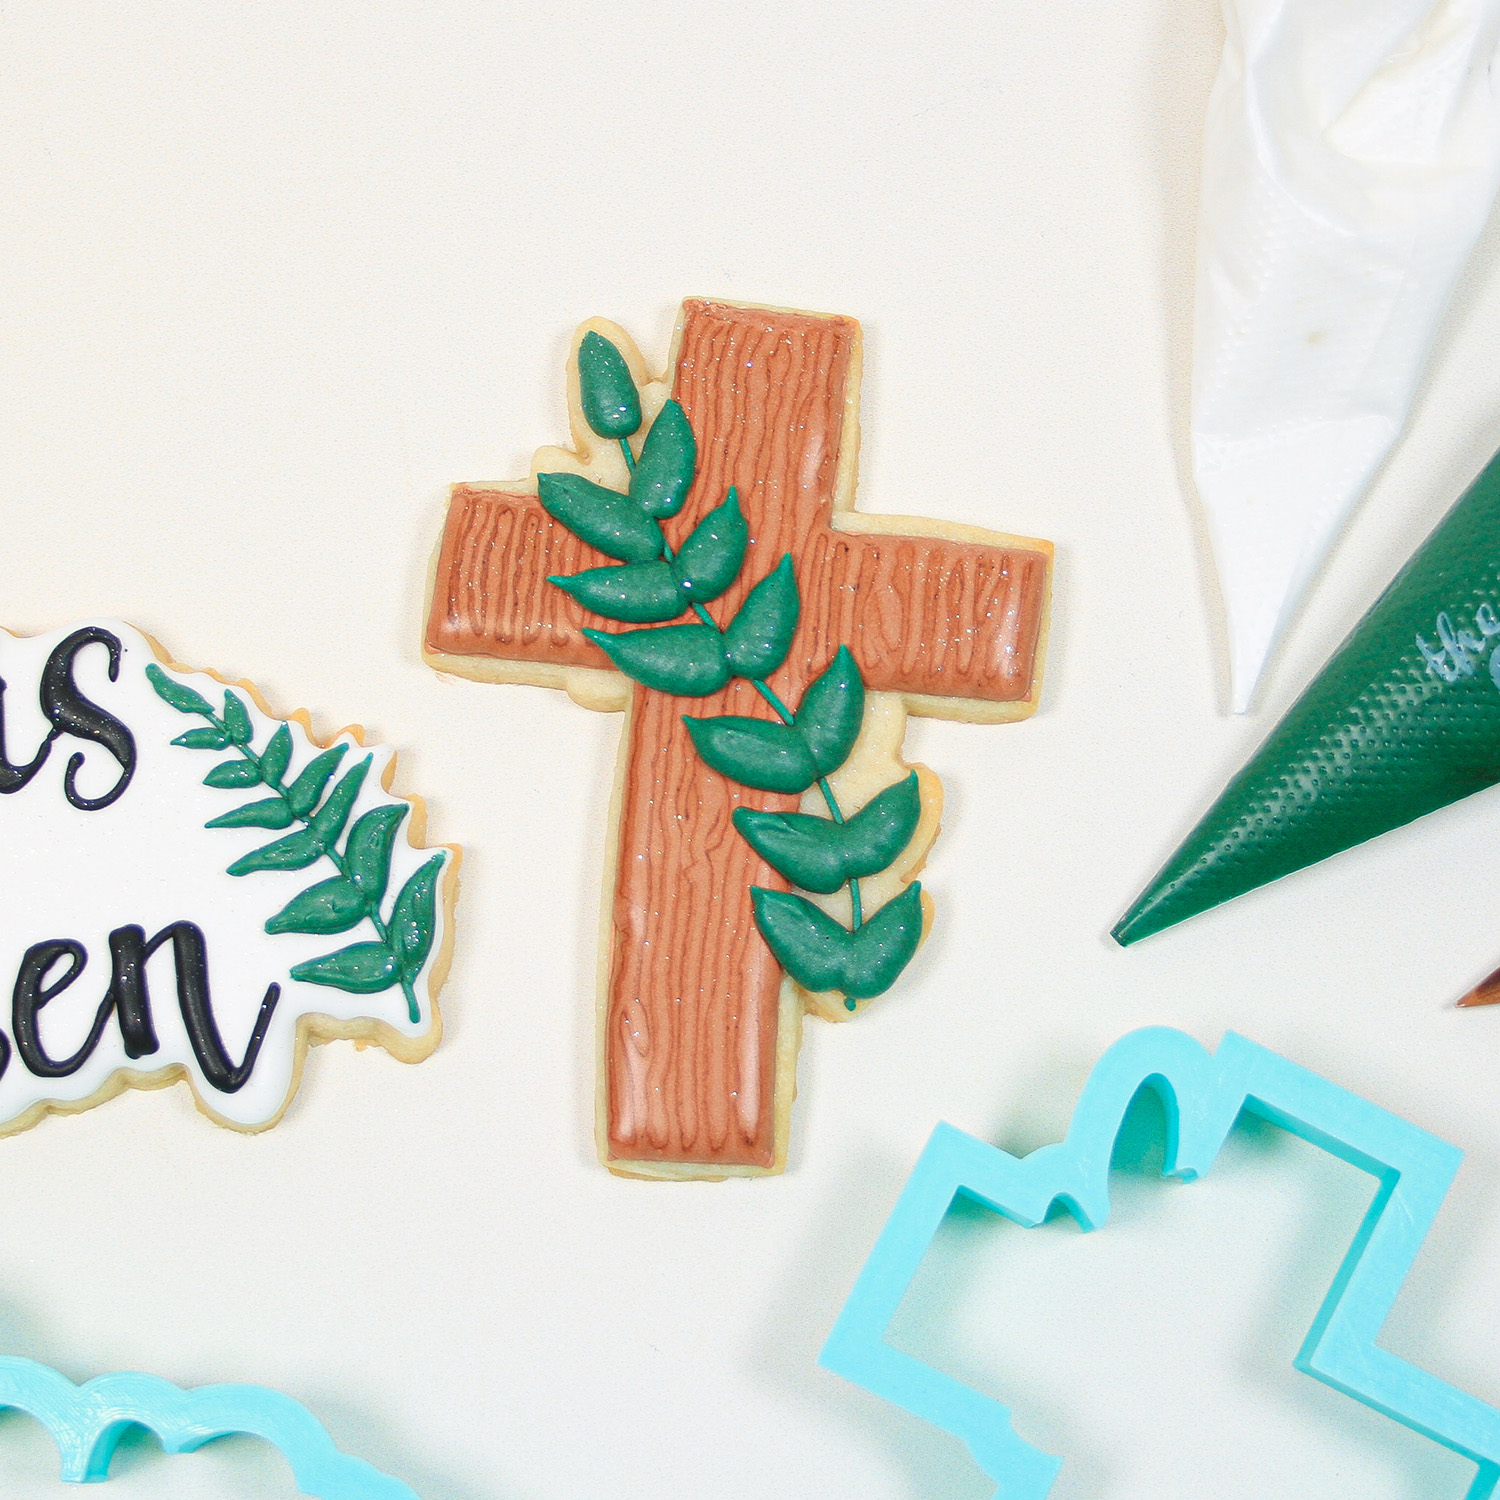 Royal Icing decorated cross cookie features wood grain icing and a green stem with leaves